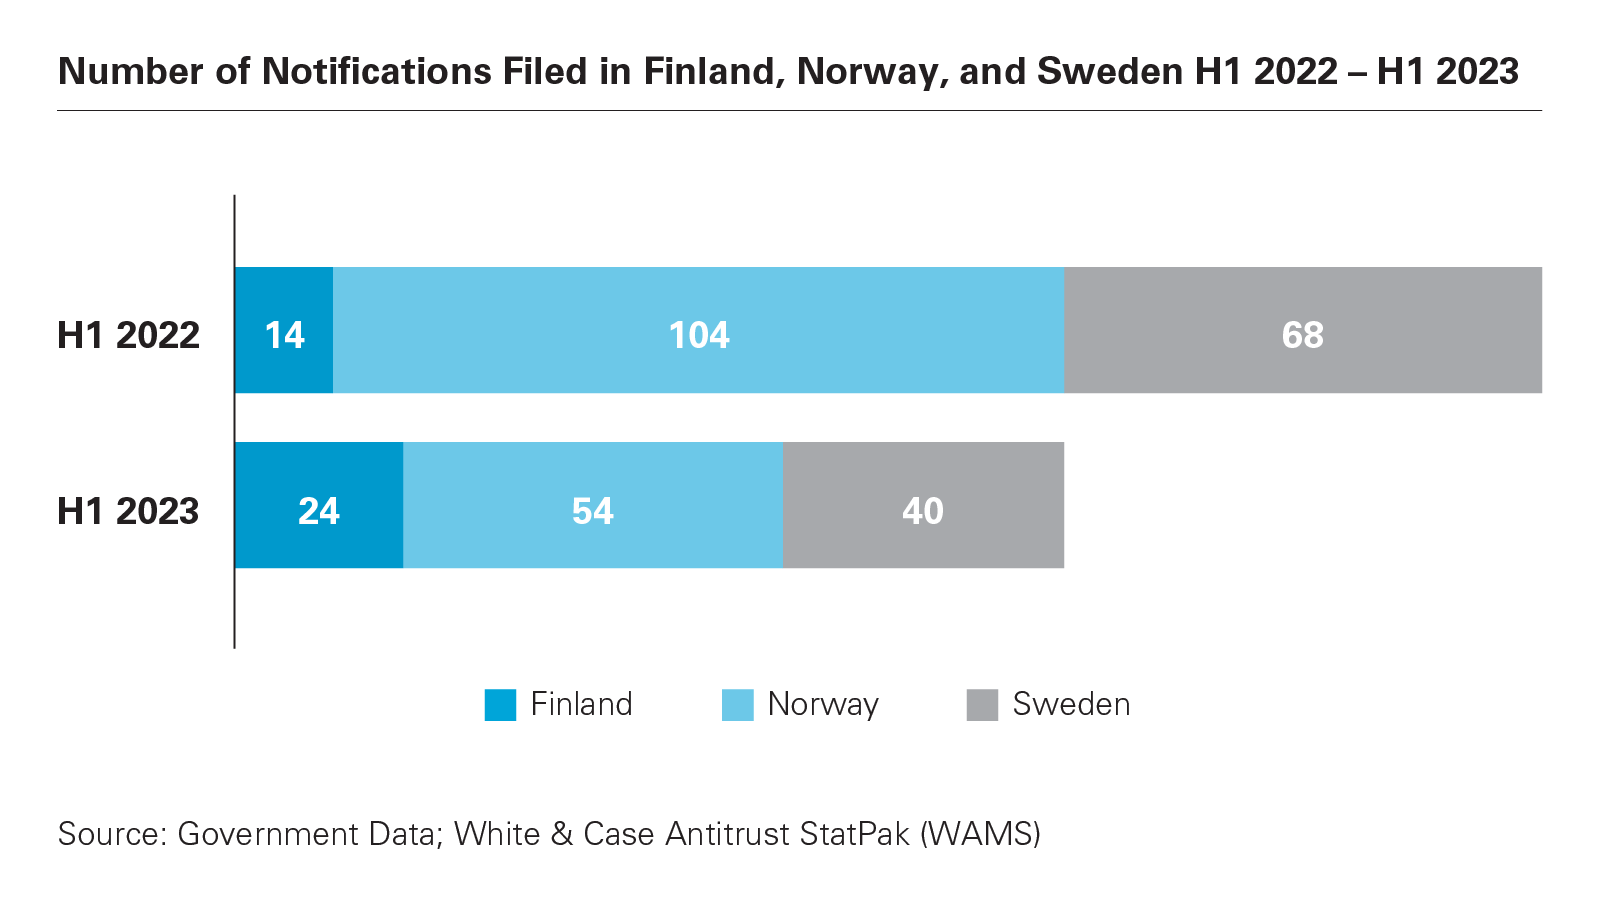 Number of Notifications Filed in Finland, Norway, and Sweden H1 2022 - 2023 graph